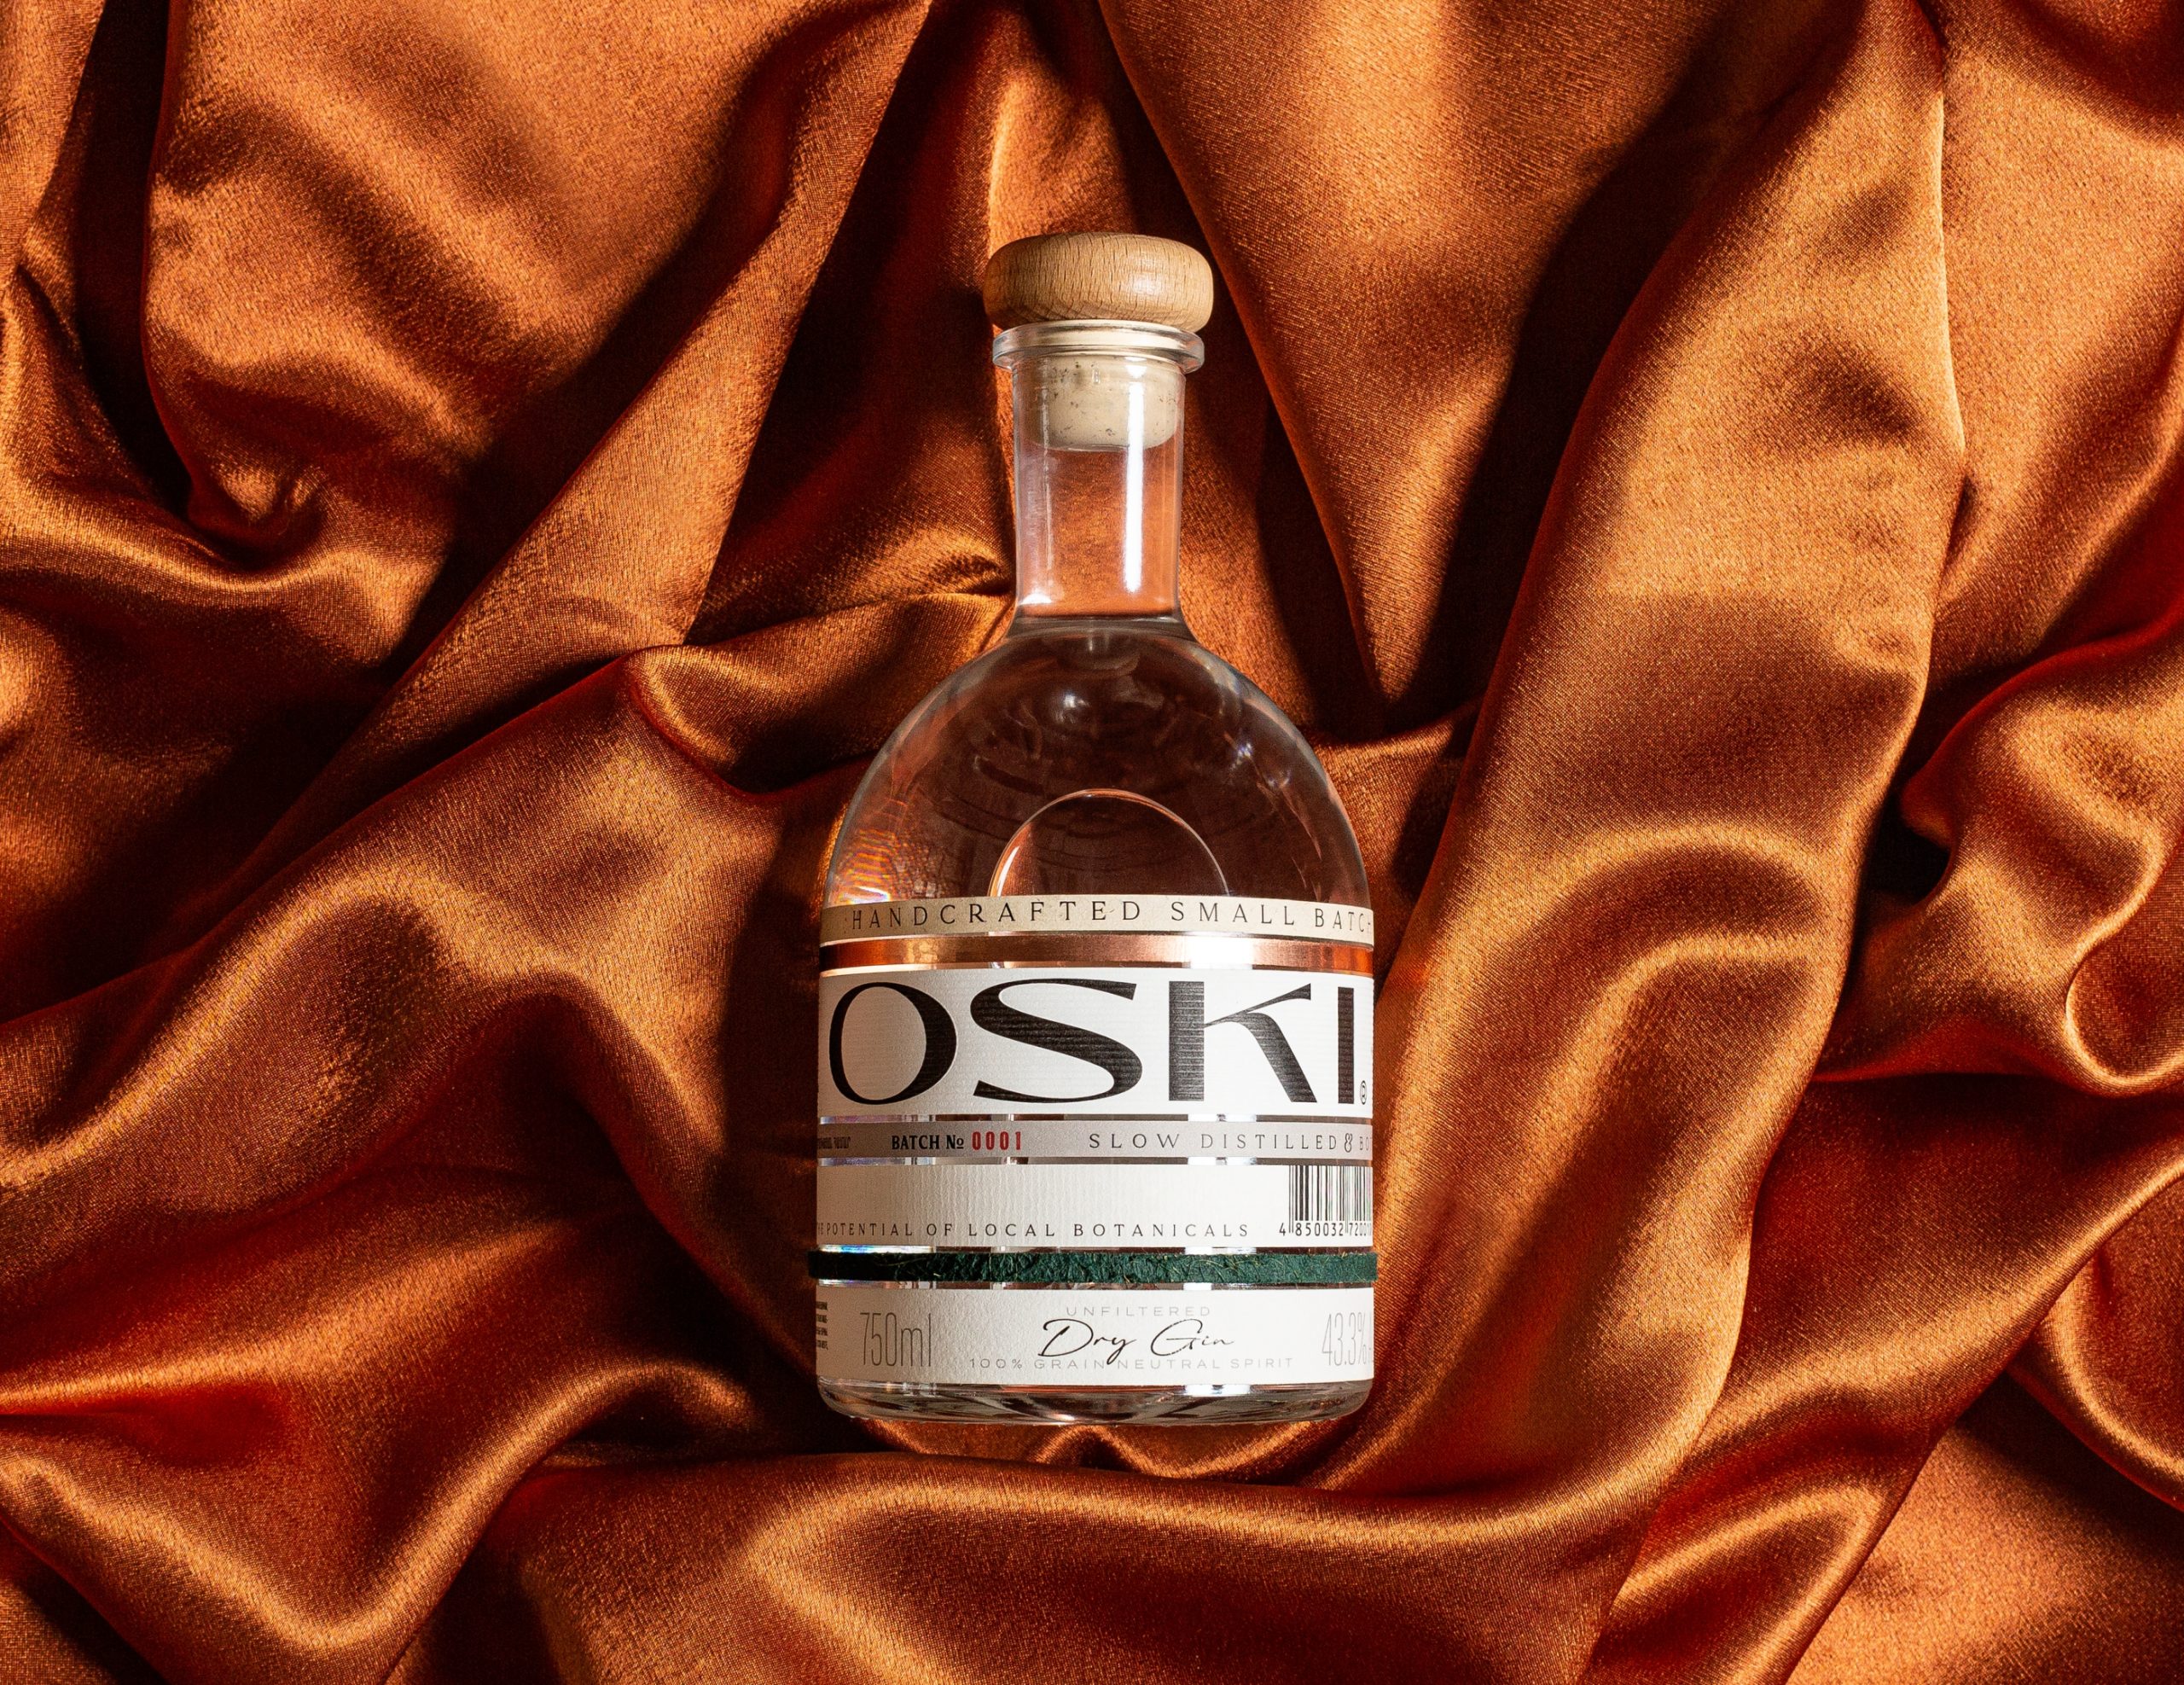 Unique Paper and Sleek Type Make Oski’s Small-Batch Gin Look Like a Prize